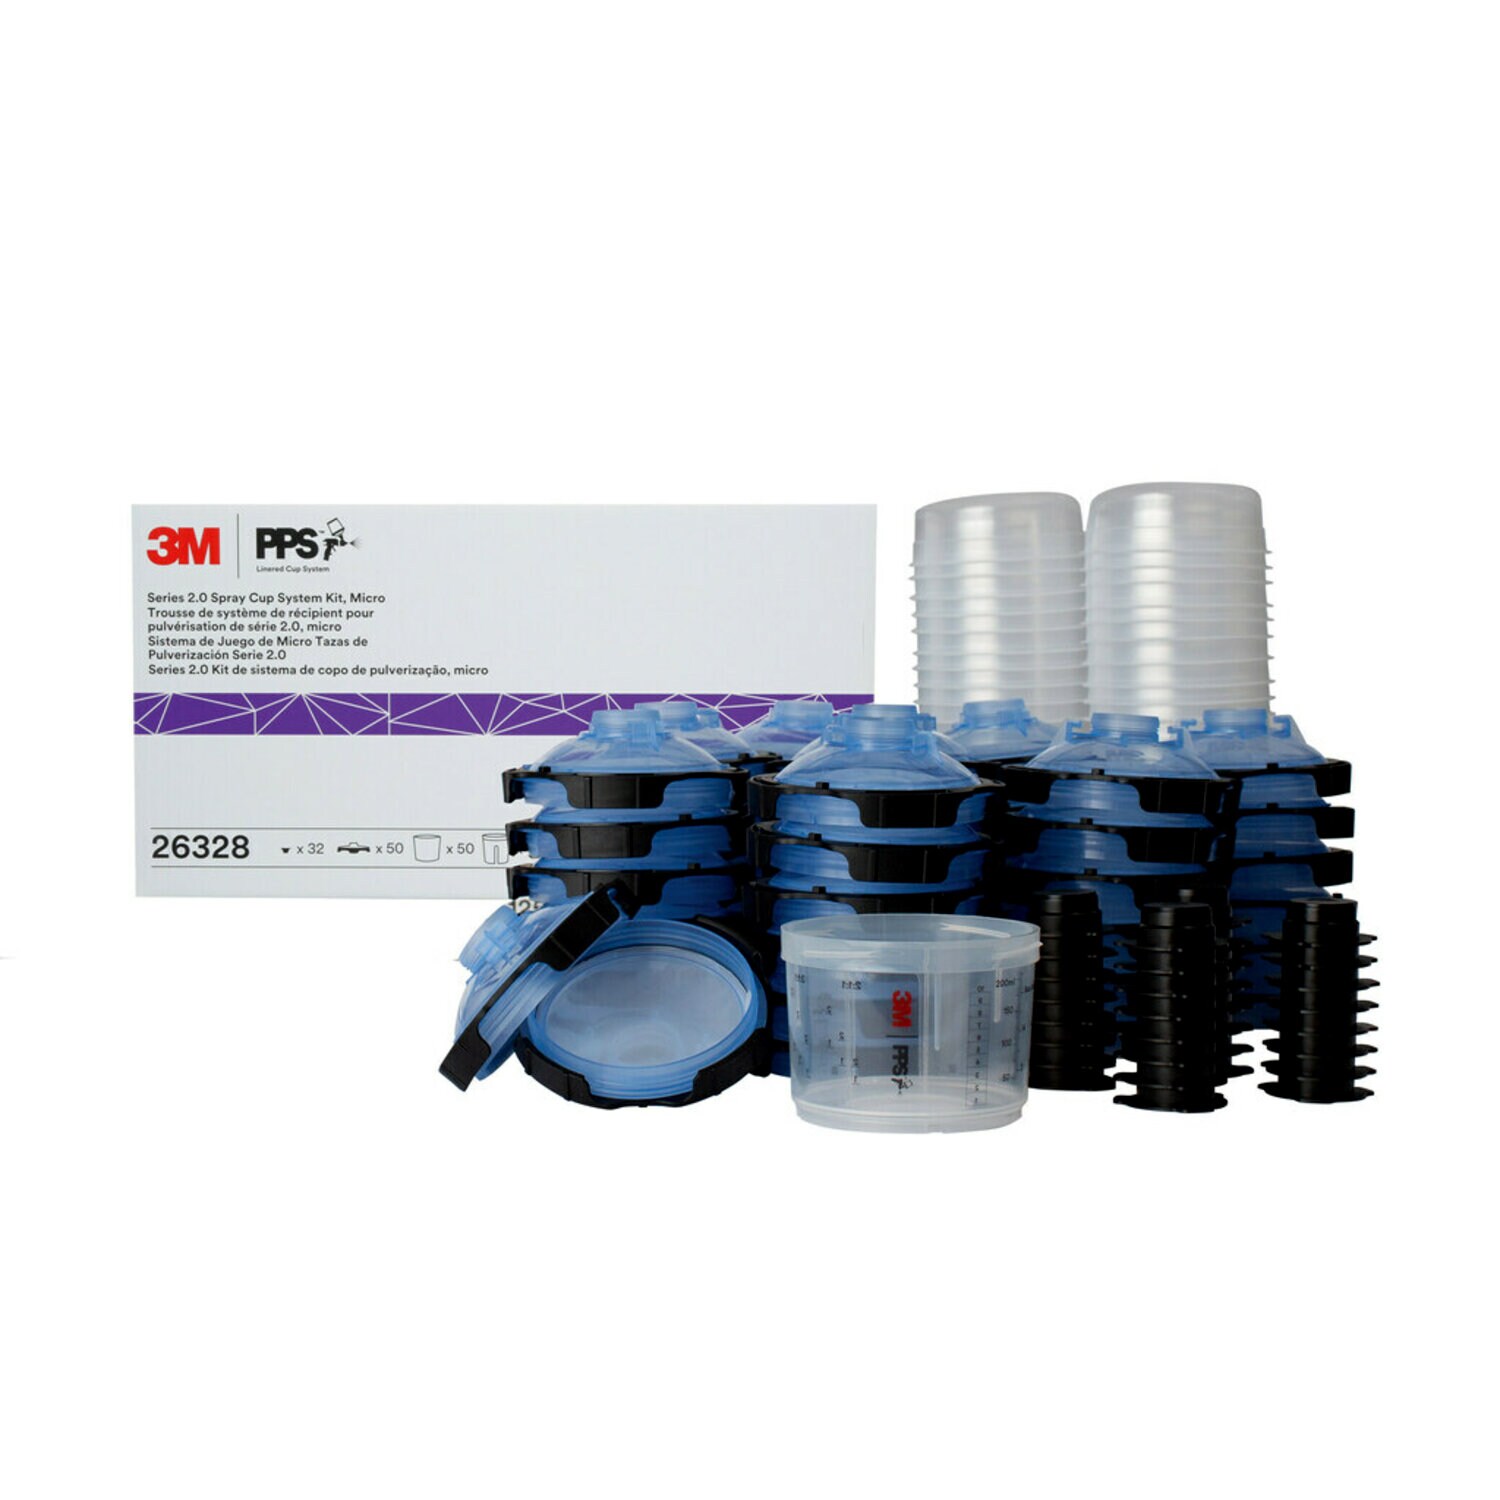 https://www.e-aircraftsupply.com/ItemImages/84/1847226E_3m-pps-2-0-spray-gun-cup-lids-and-liners-kit-26328-micro-3-oz-125-micron-filter-catalog-image.jpg